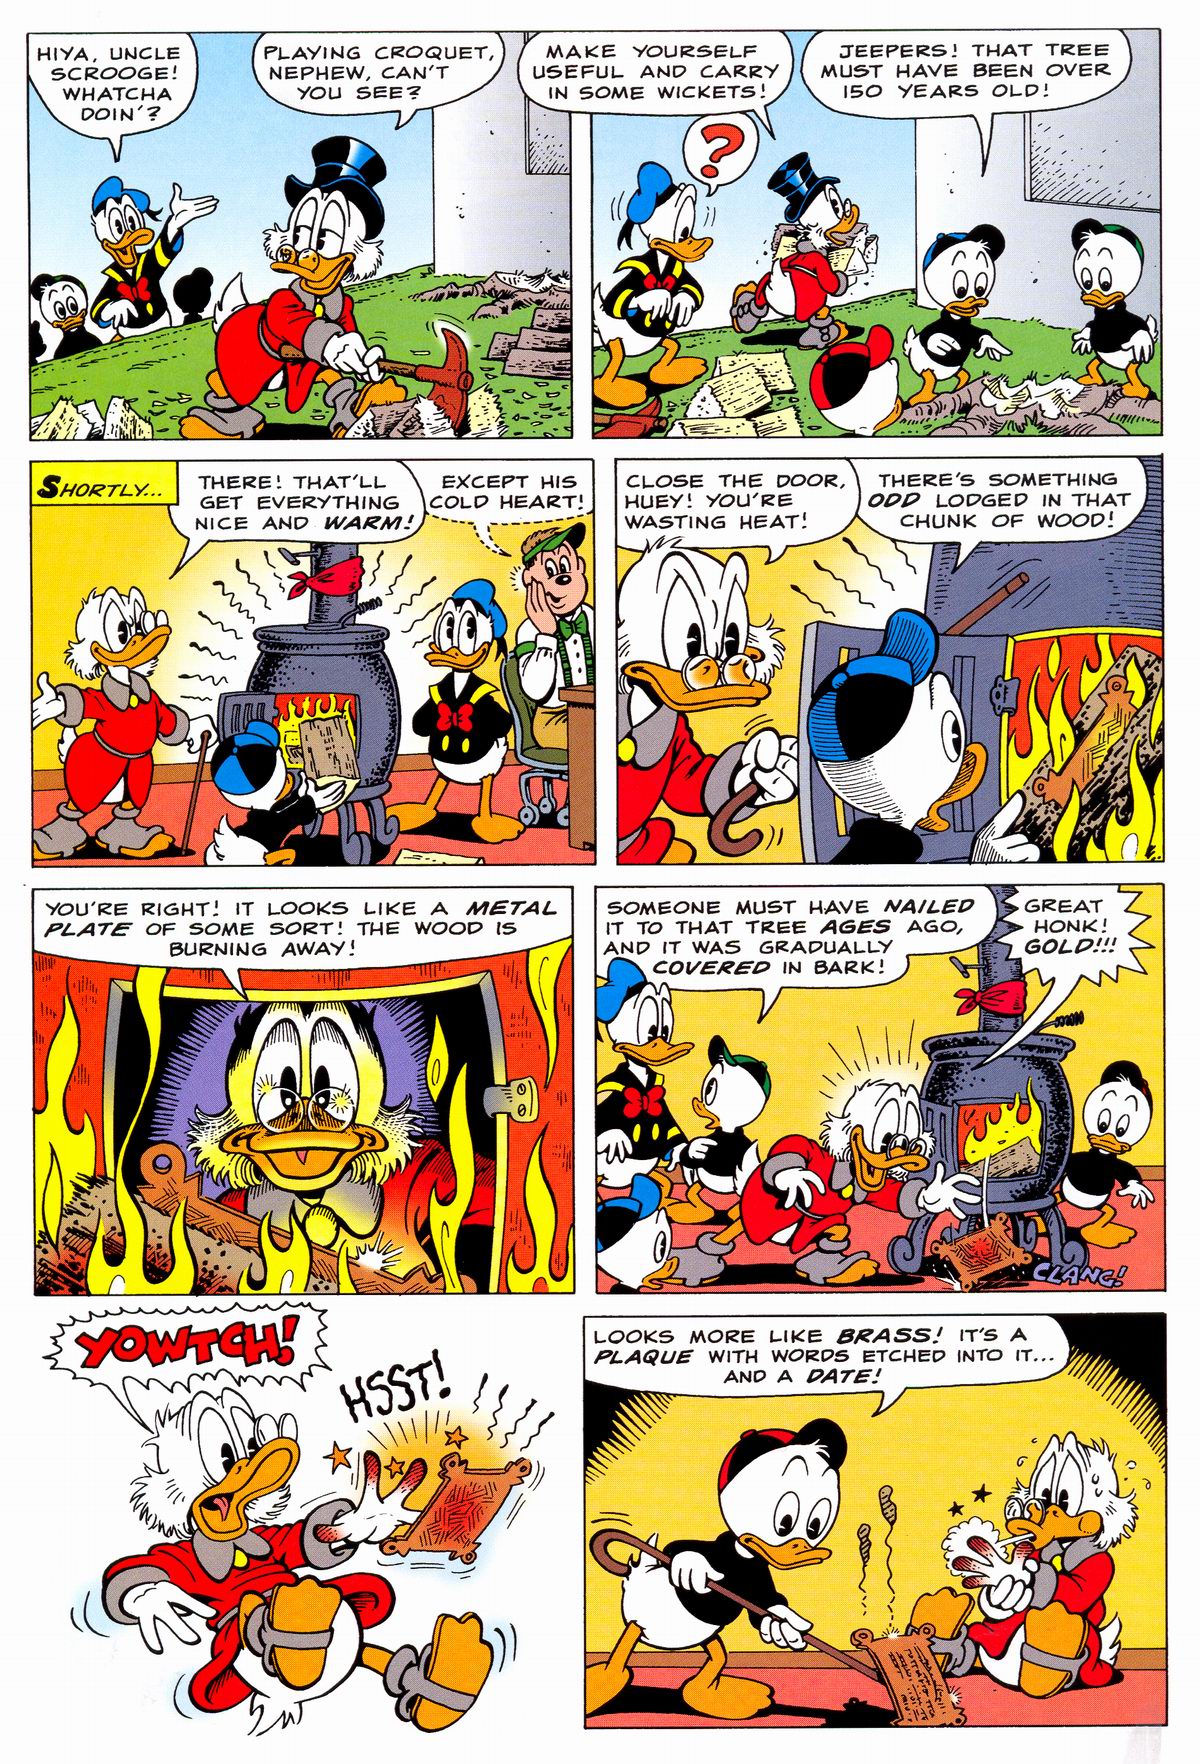 Read online Uncle Scrooge (1953) comic -  Issue #331 - 5